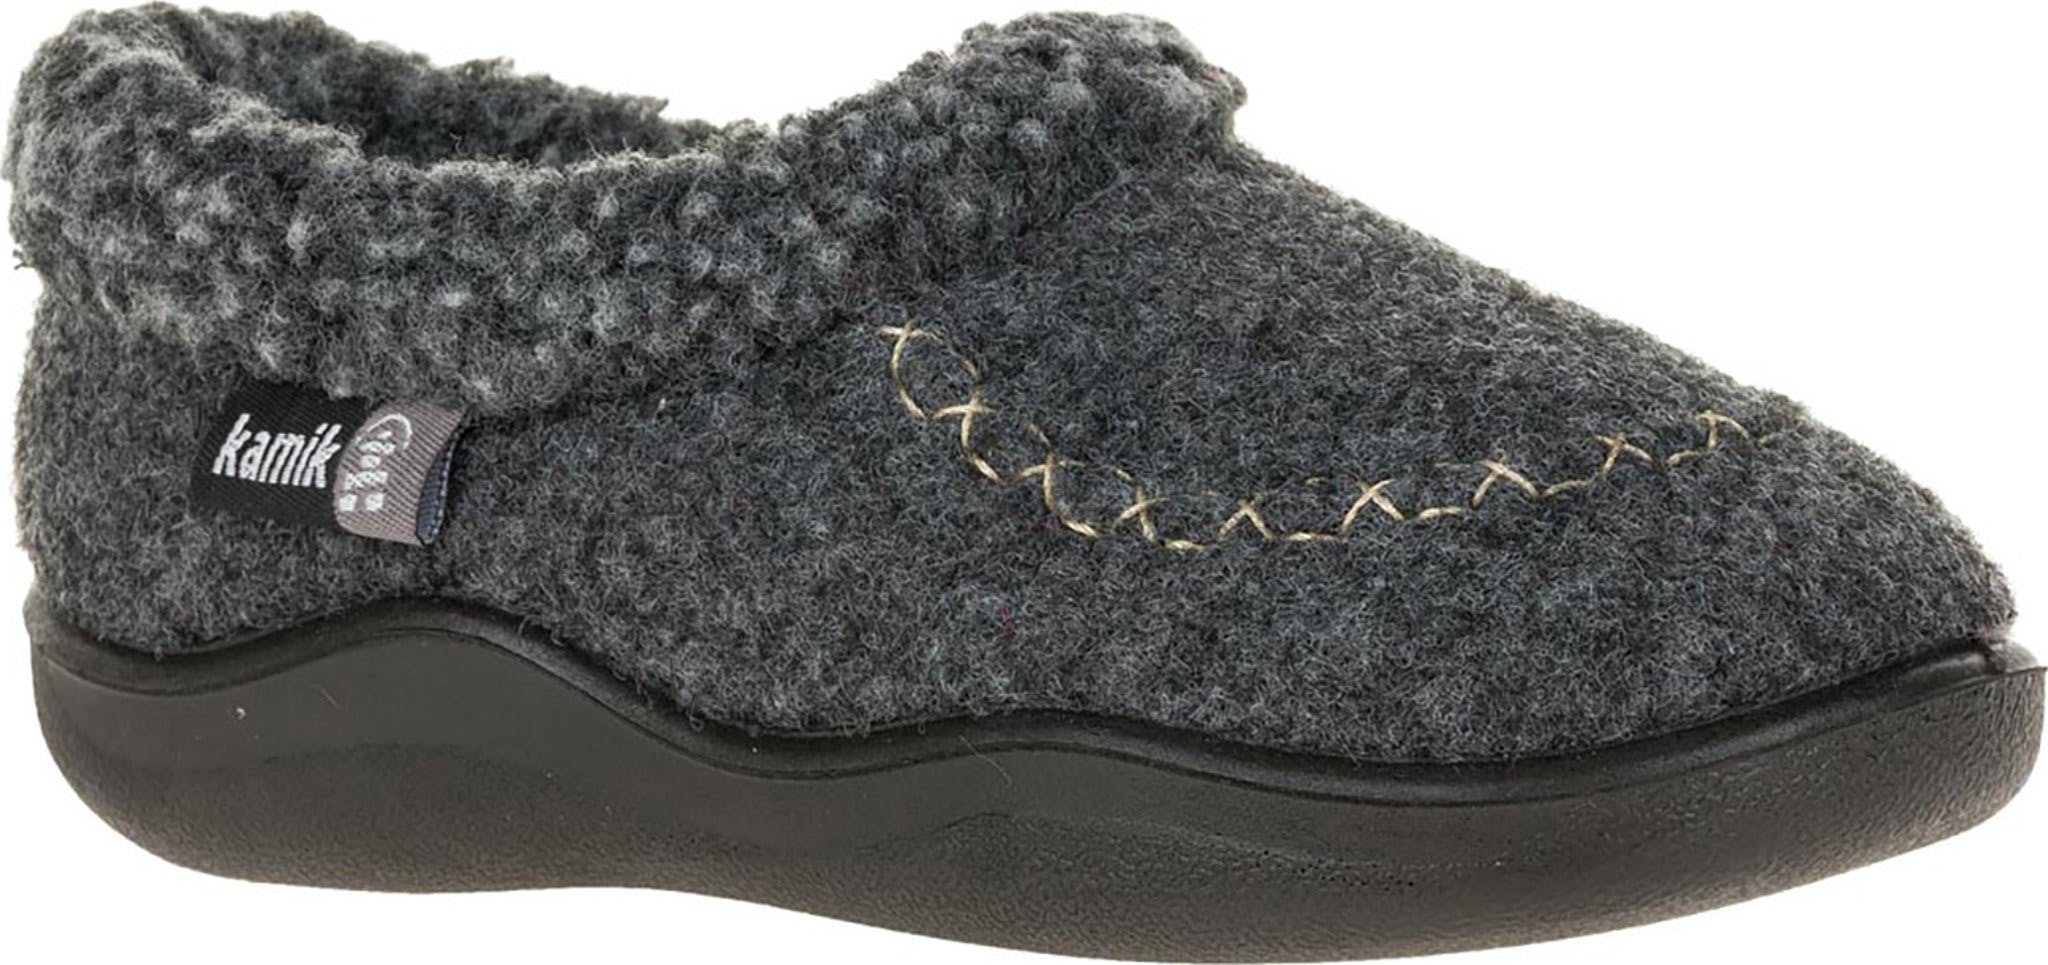 Product image for CozyCabin 2 Slippers - Toddler